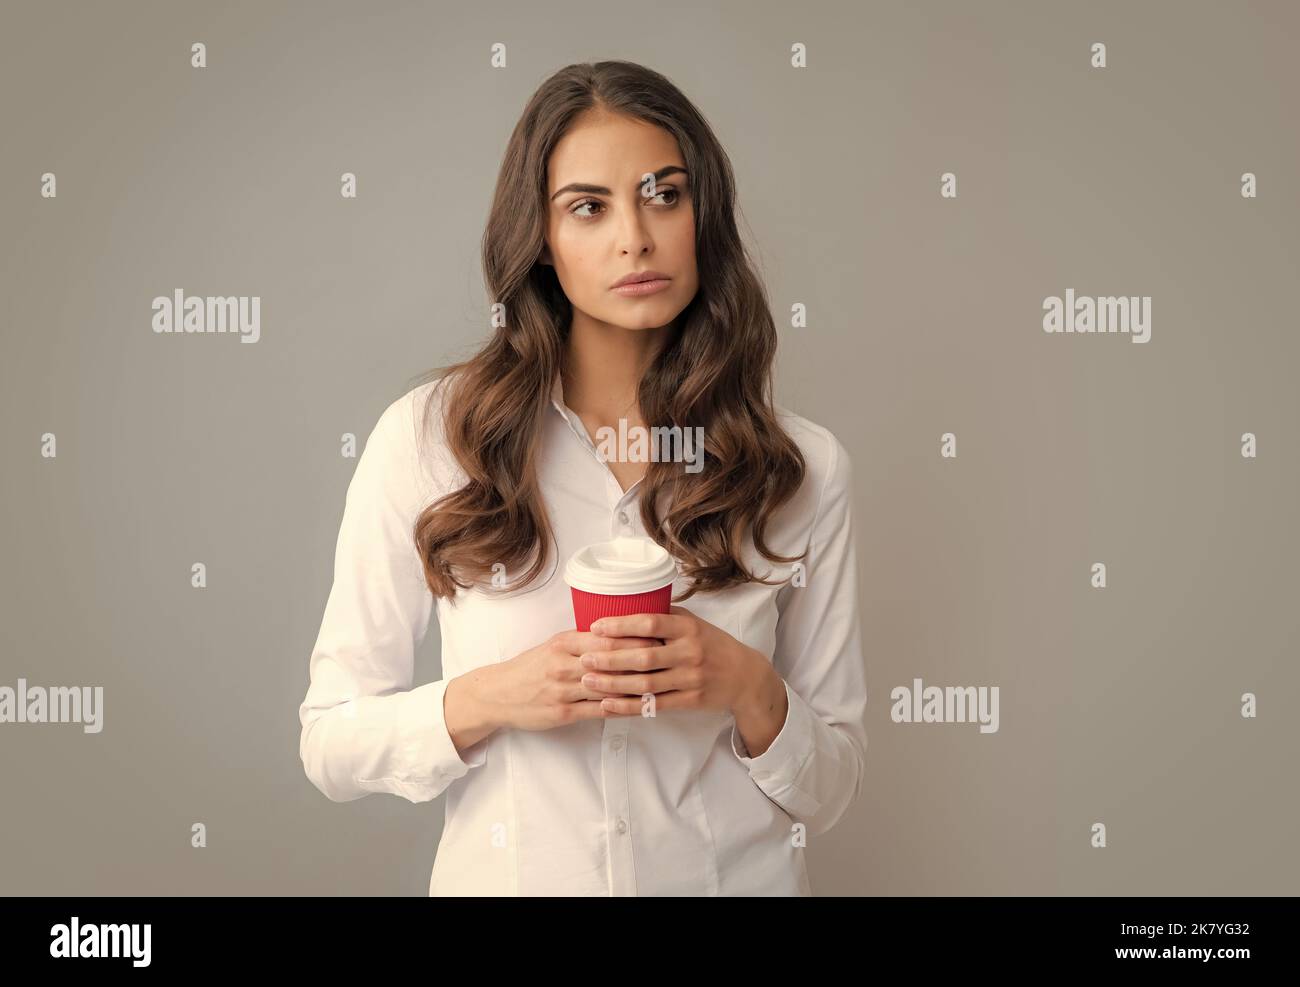 Portrait of nice cute girl holding cup of coffee. Young woman smiling with a coffee cup, isolated on gray background. Stock Photo